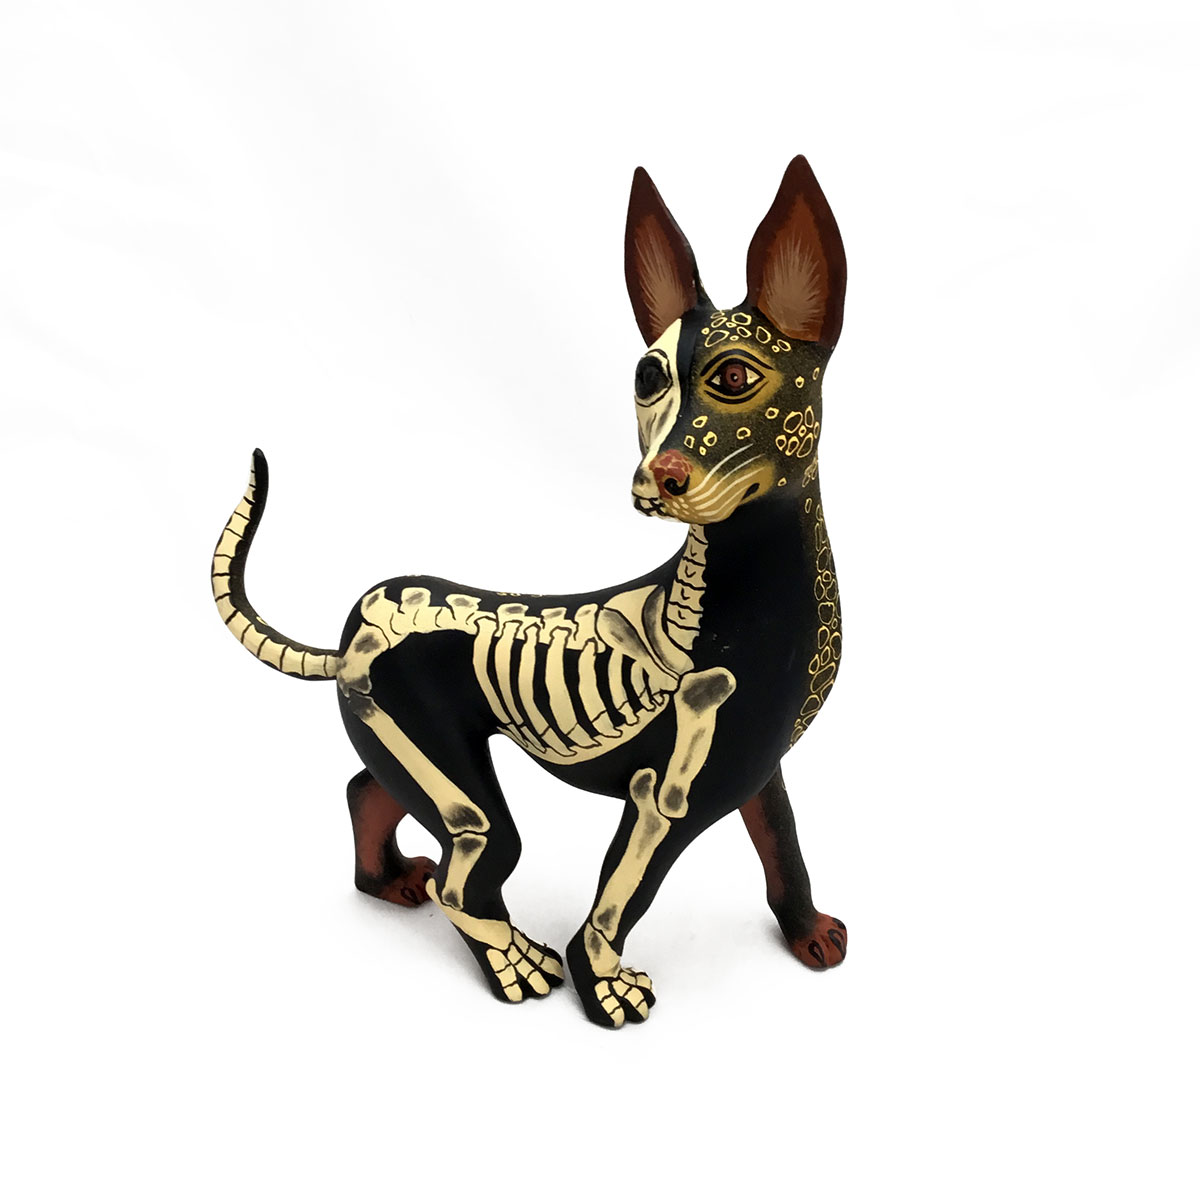 Eleazar Morales Eleazar Morales: Day of the Dead Mexican Hairless Xolo Dog Day of the Dead